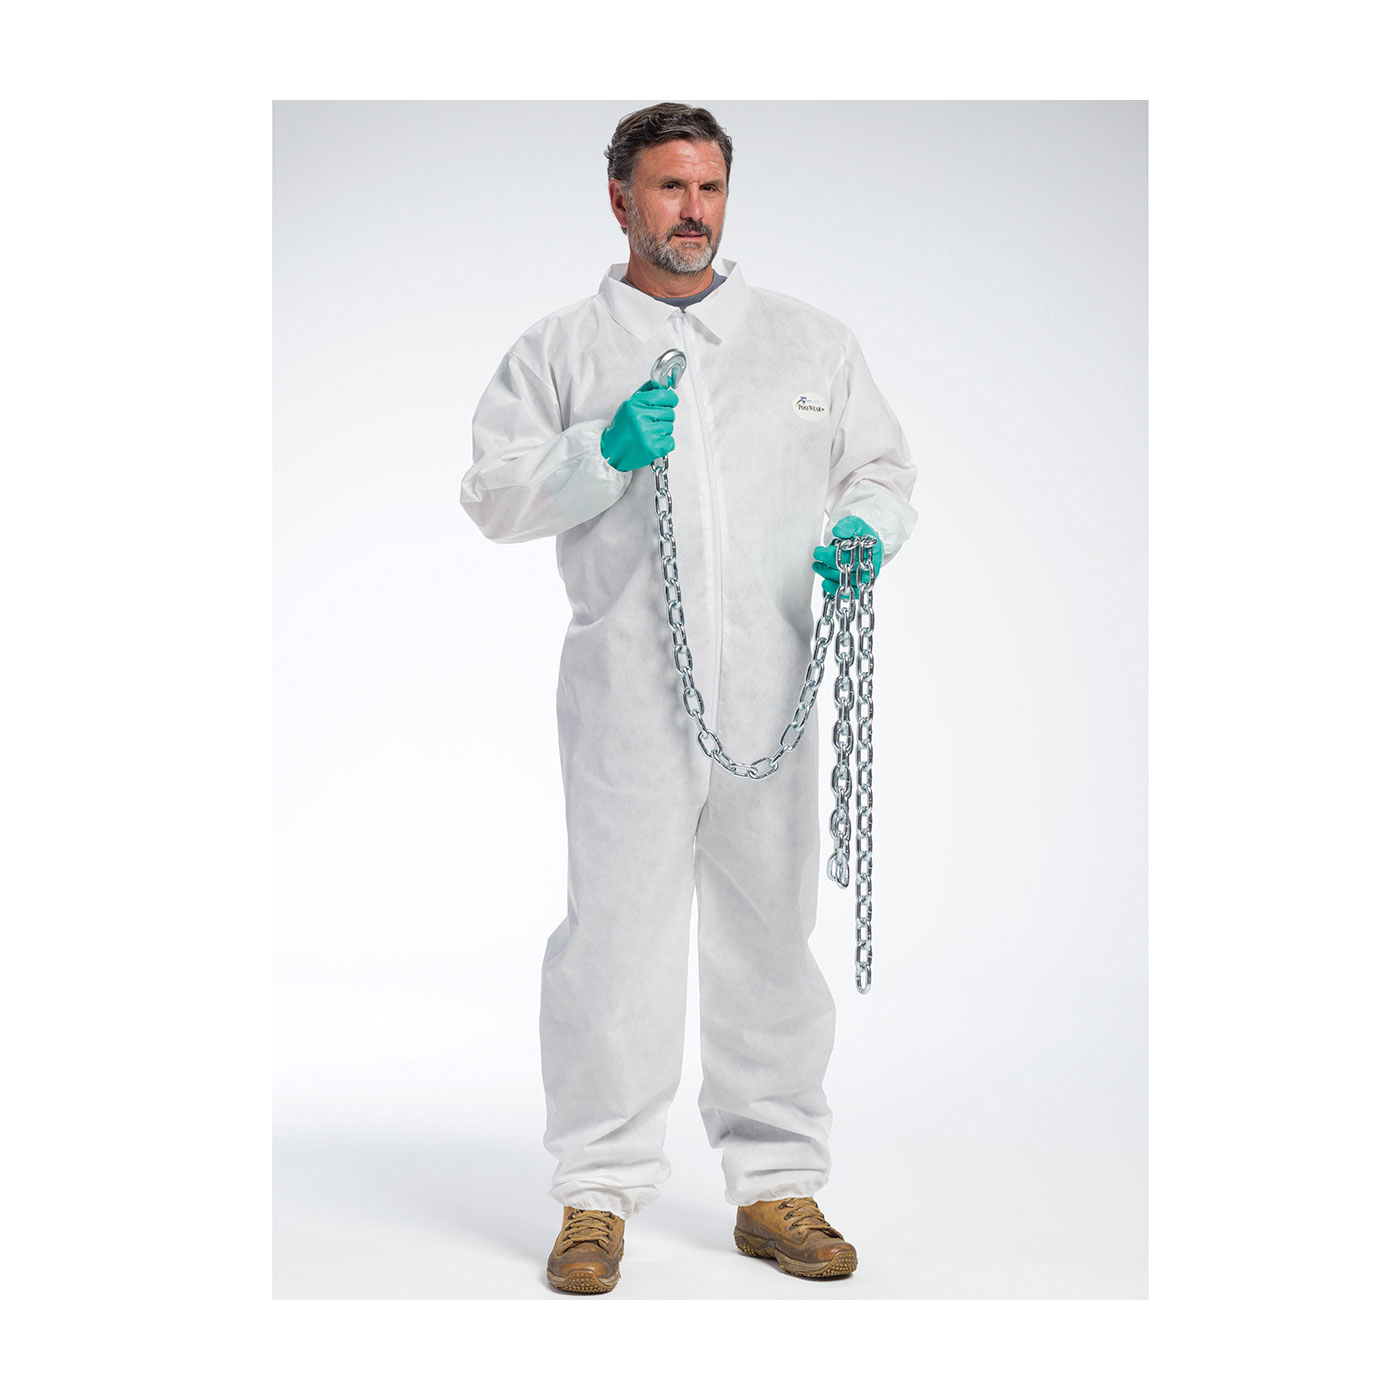 PIP® C3802/XL C3802 M3 Anti-Static Disposable Coverall, XL, White, SMMMS Fabric, 27.6 in Chest, 29-1/2 in L Inseam